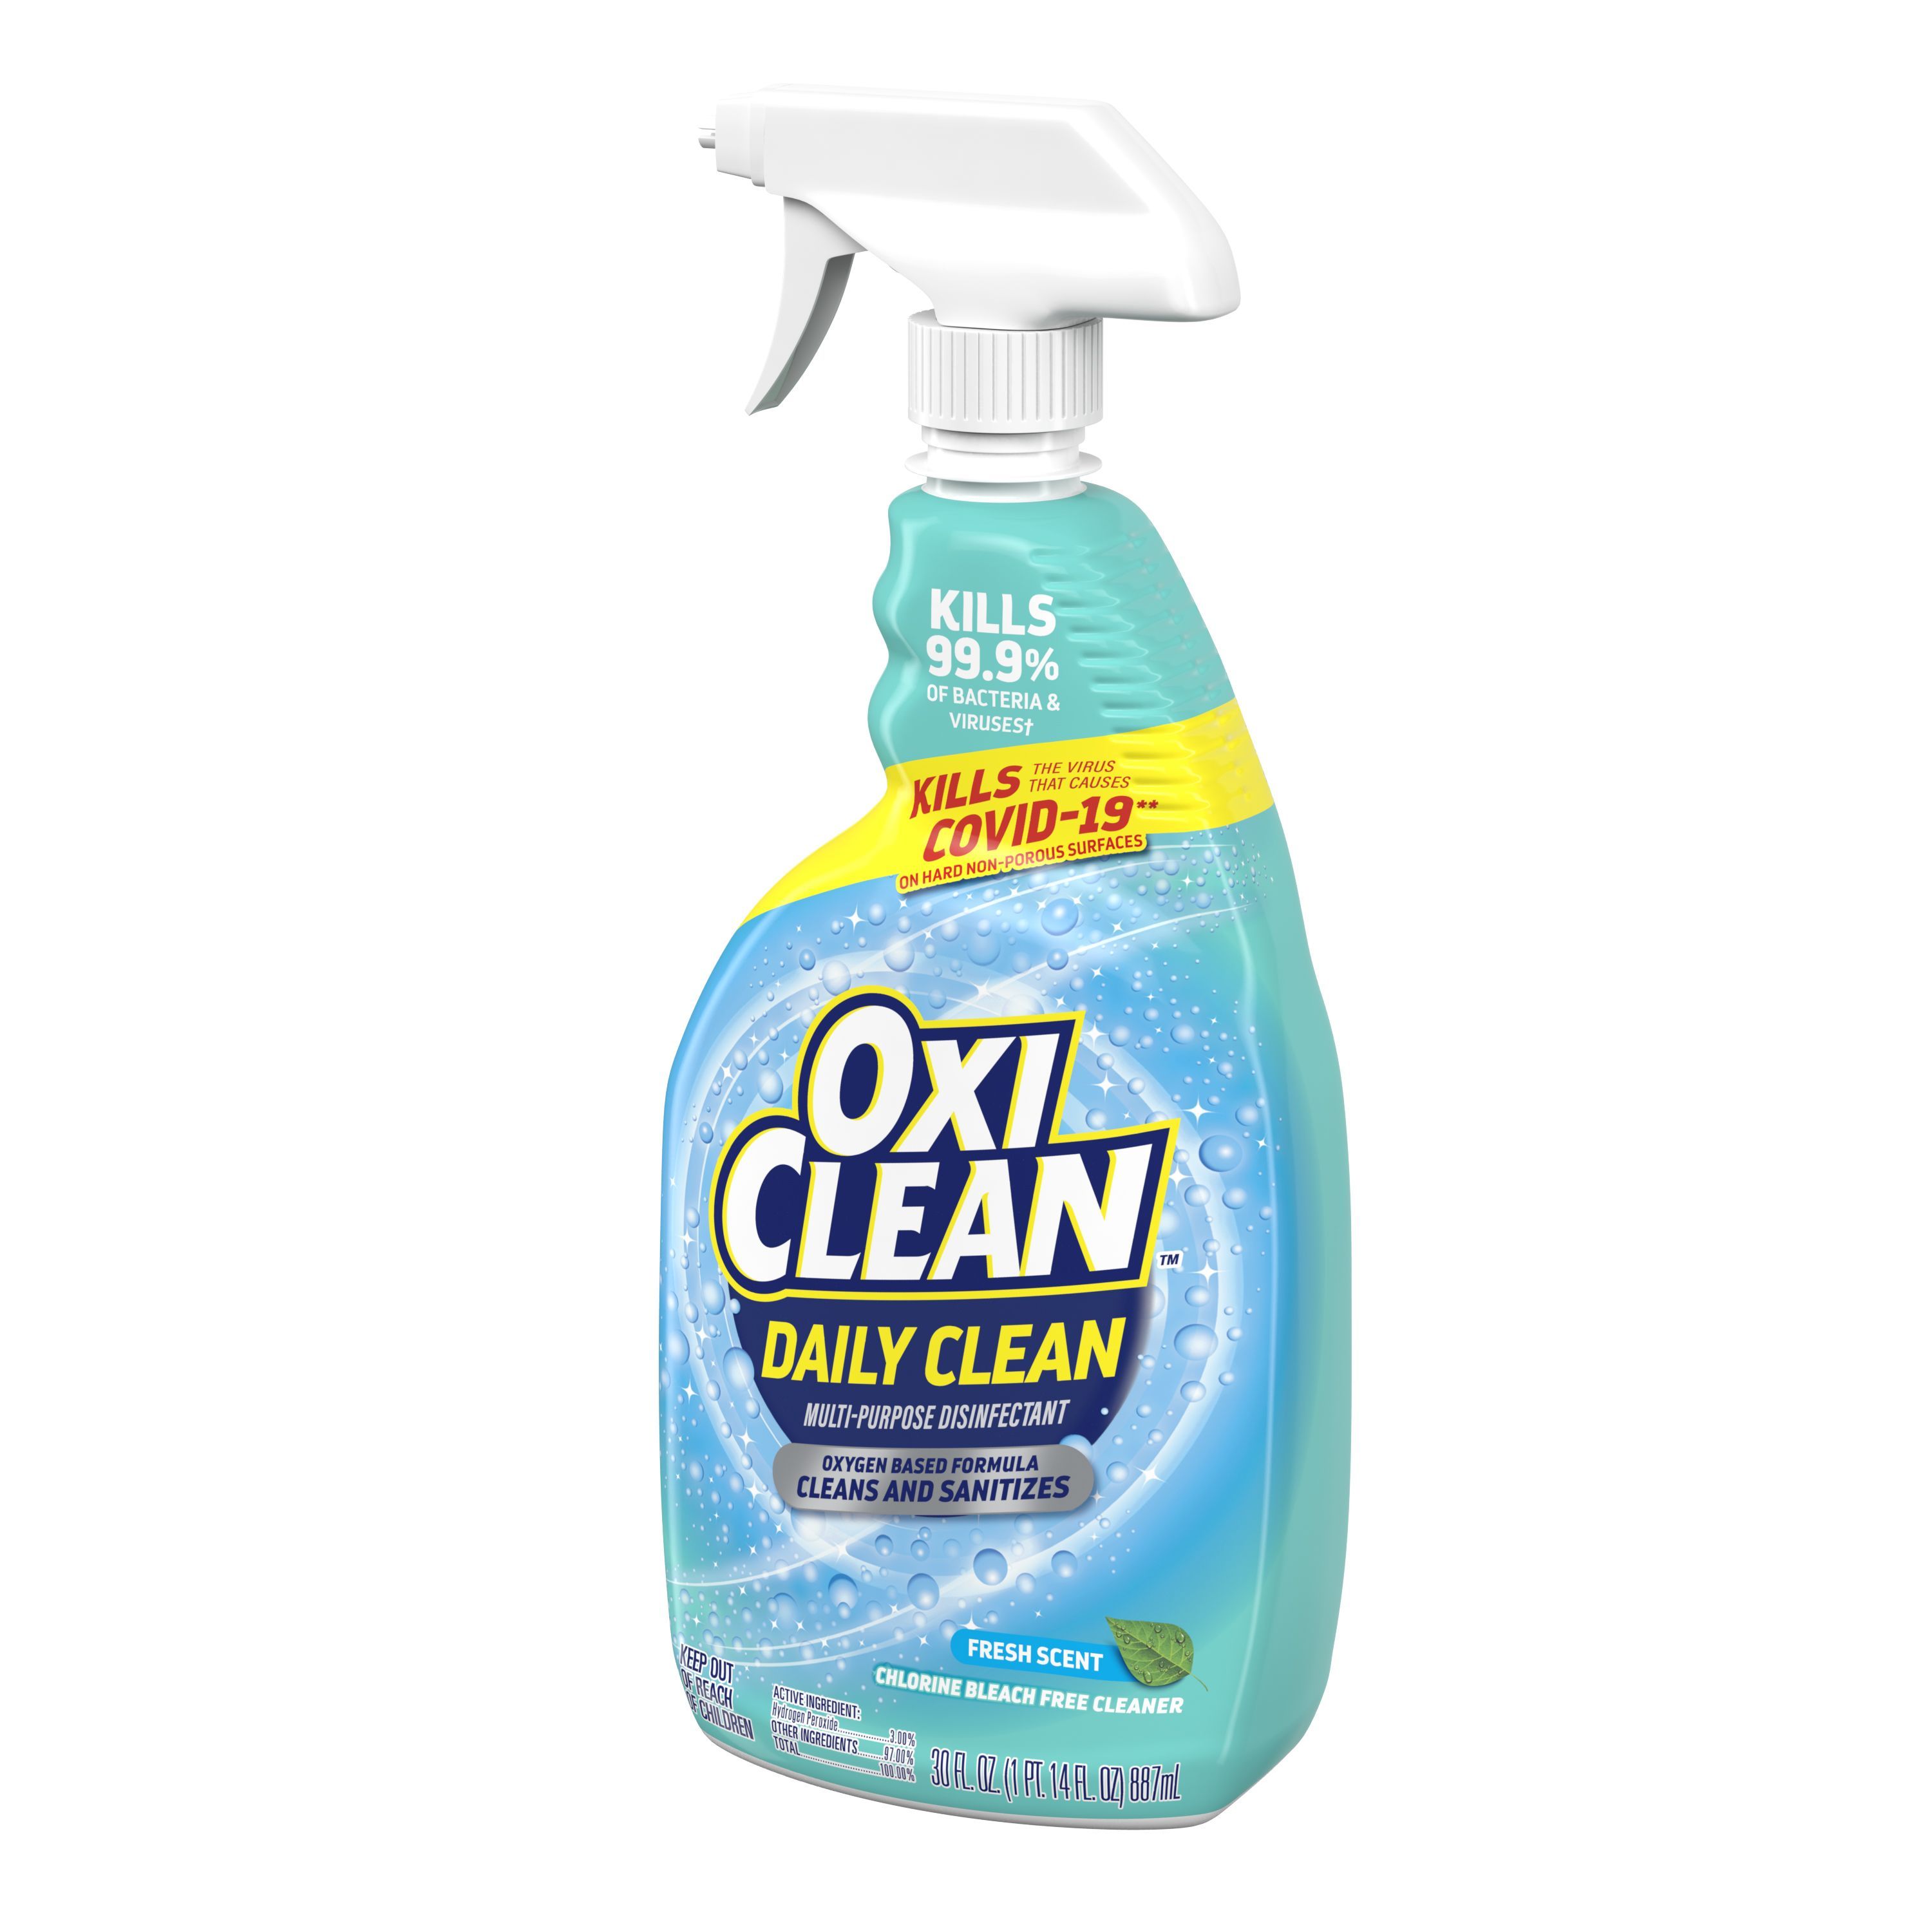 OxiClean Daily Clean Multi-Purpose Disinfectant